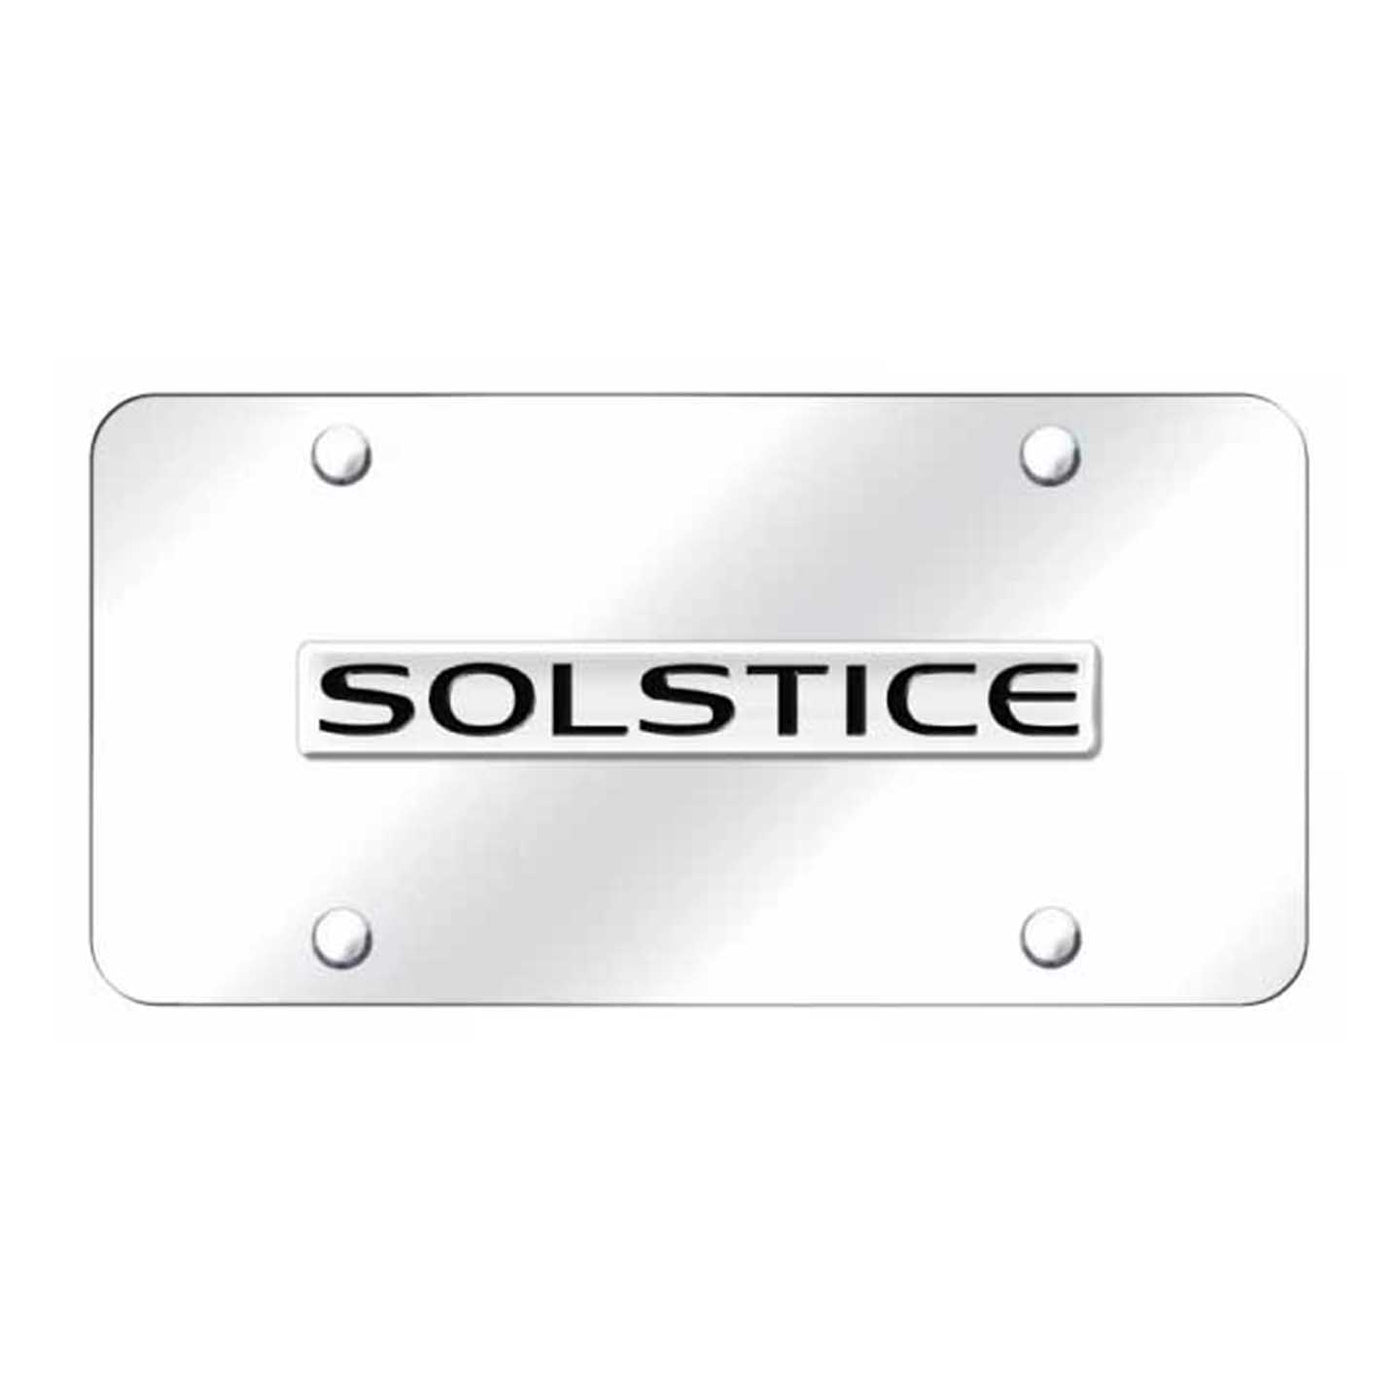 Solstice Name License Plate - Chrome on Mirrored